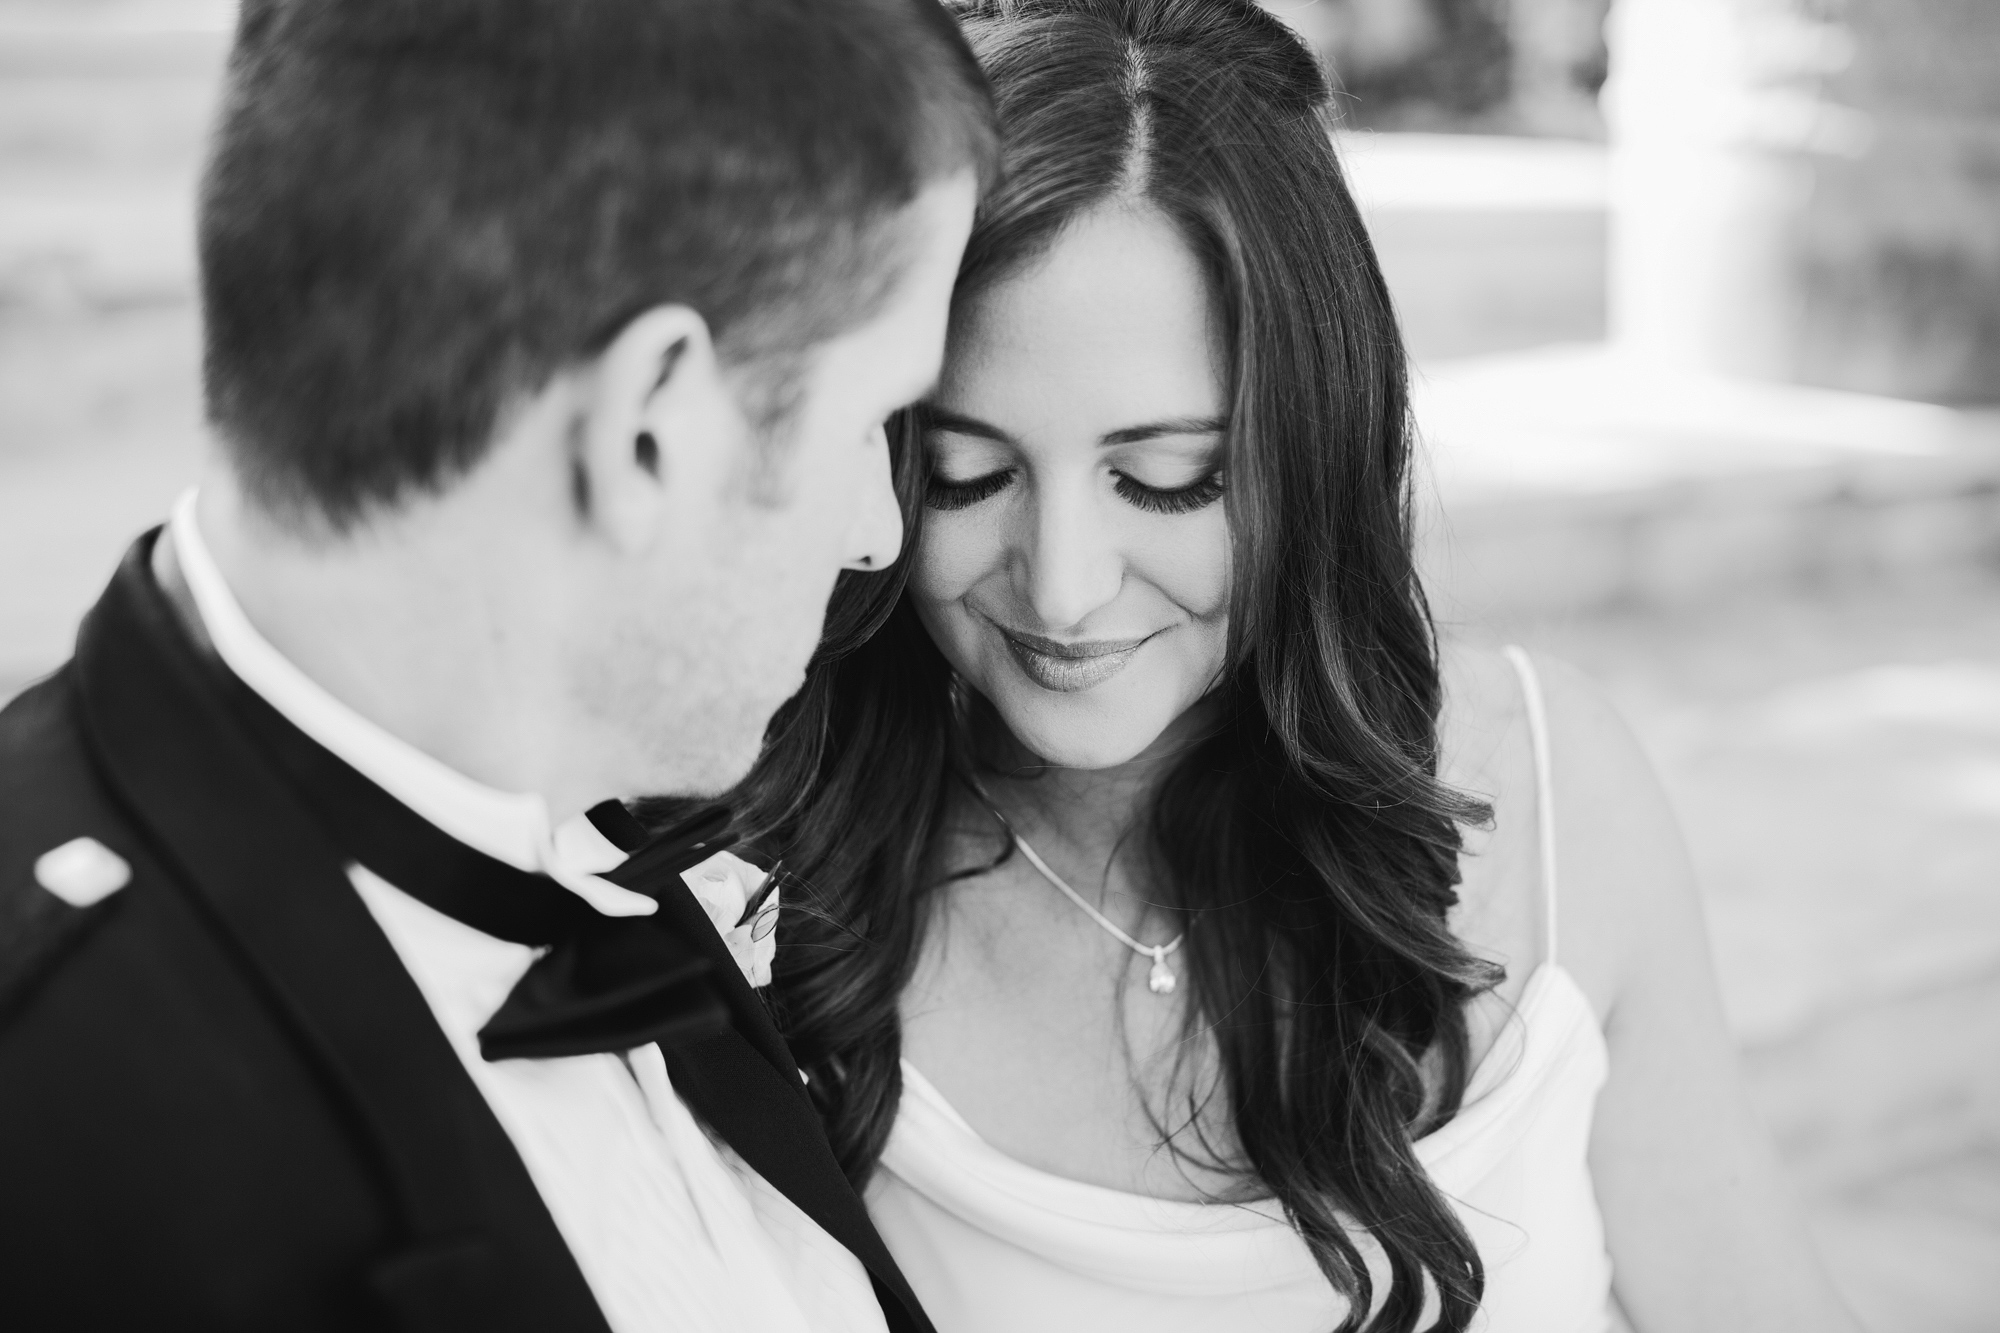 A beautiful black and white photo of the bride and groom. 